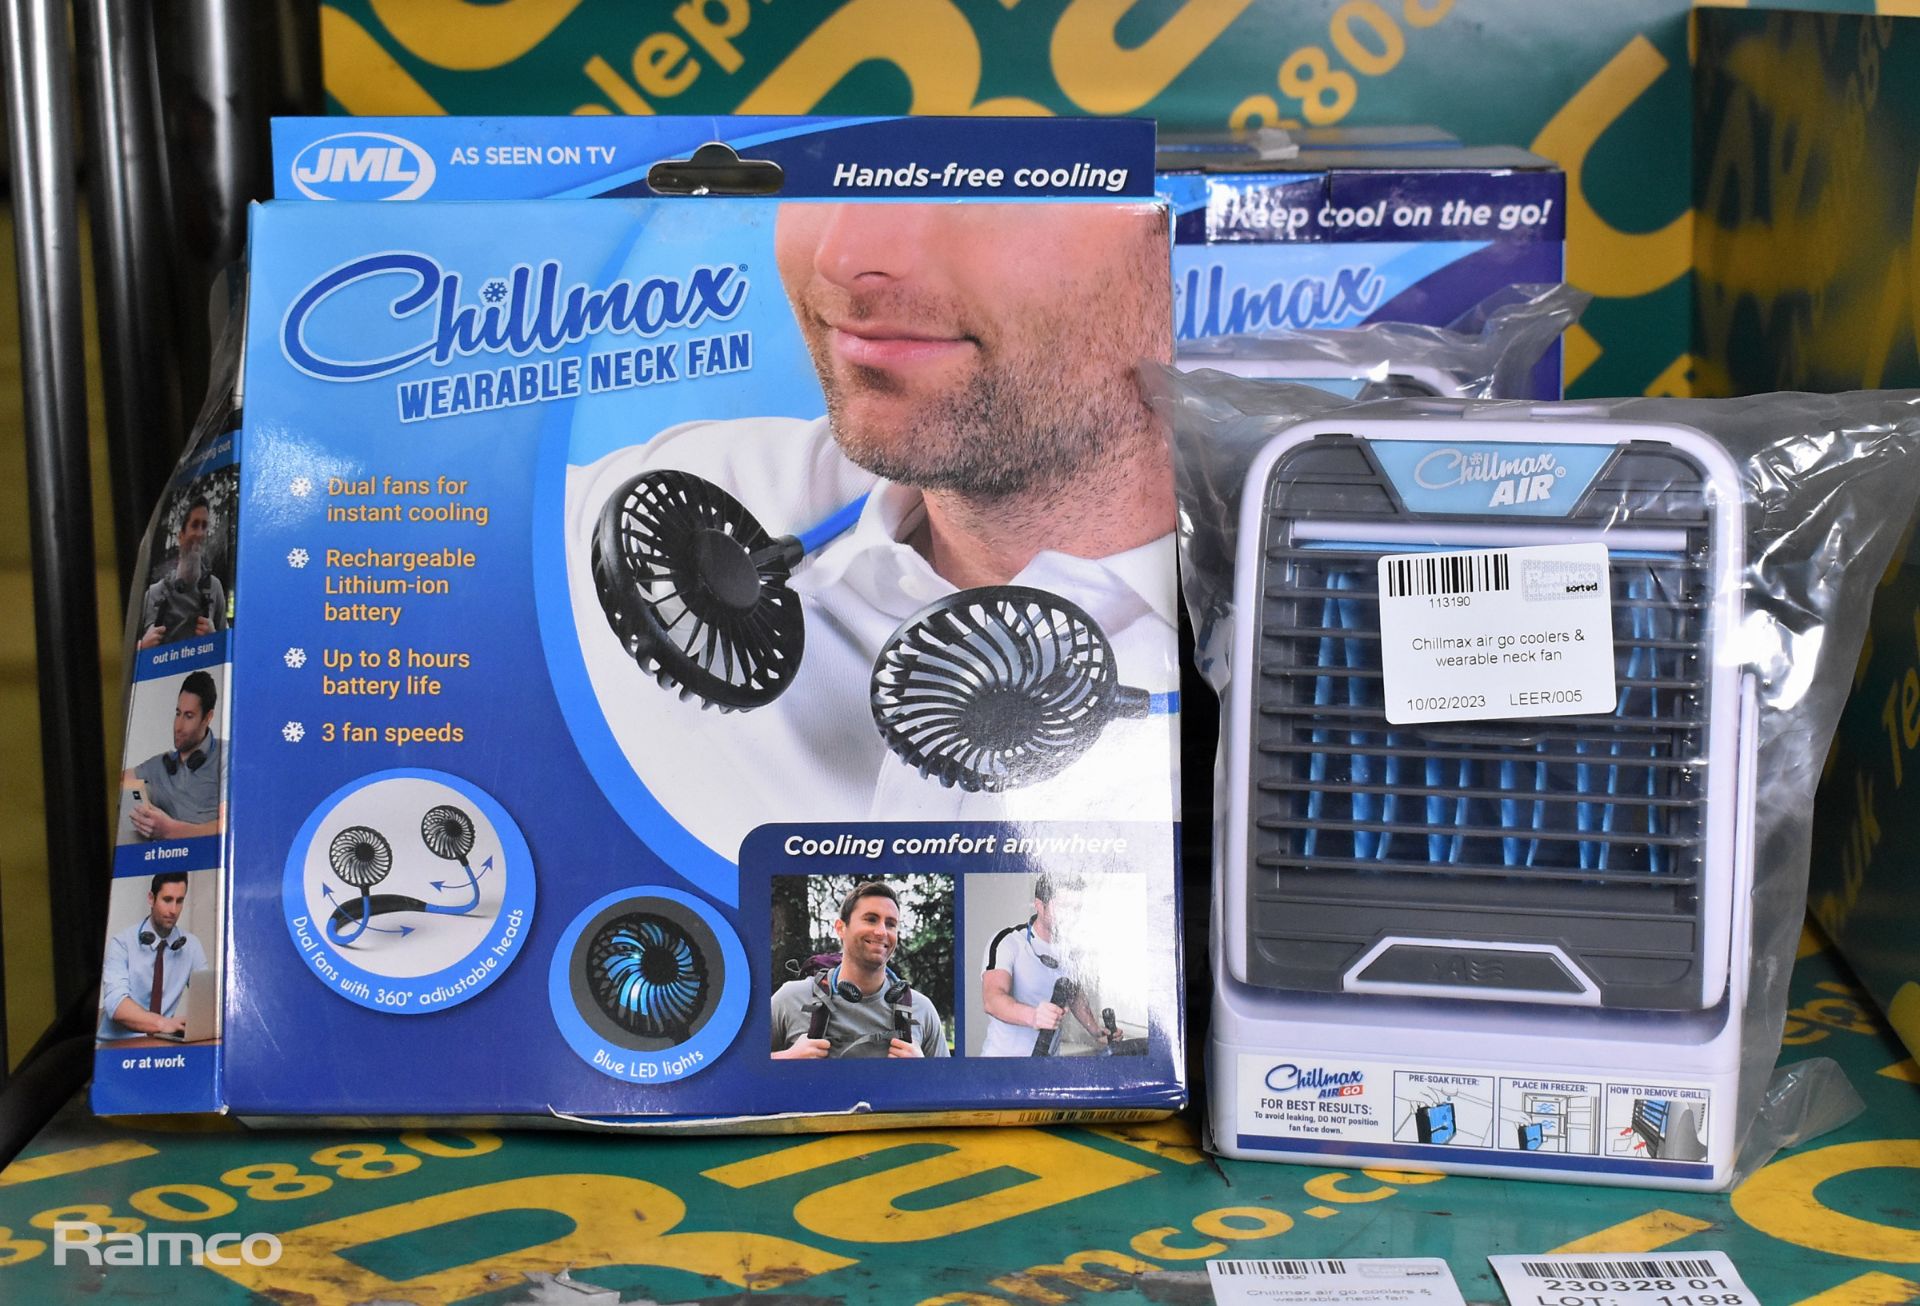 Chillmax air go coolers & wearable neck fan - Image 2 of 4